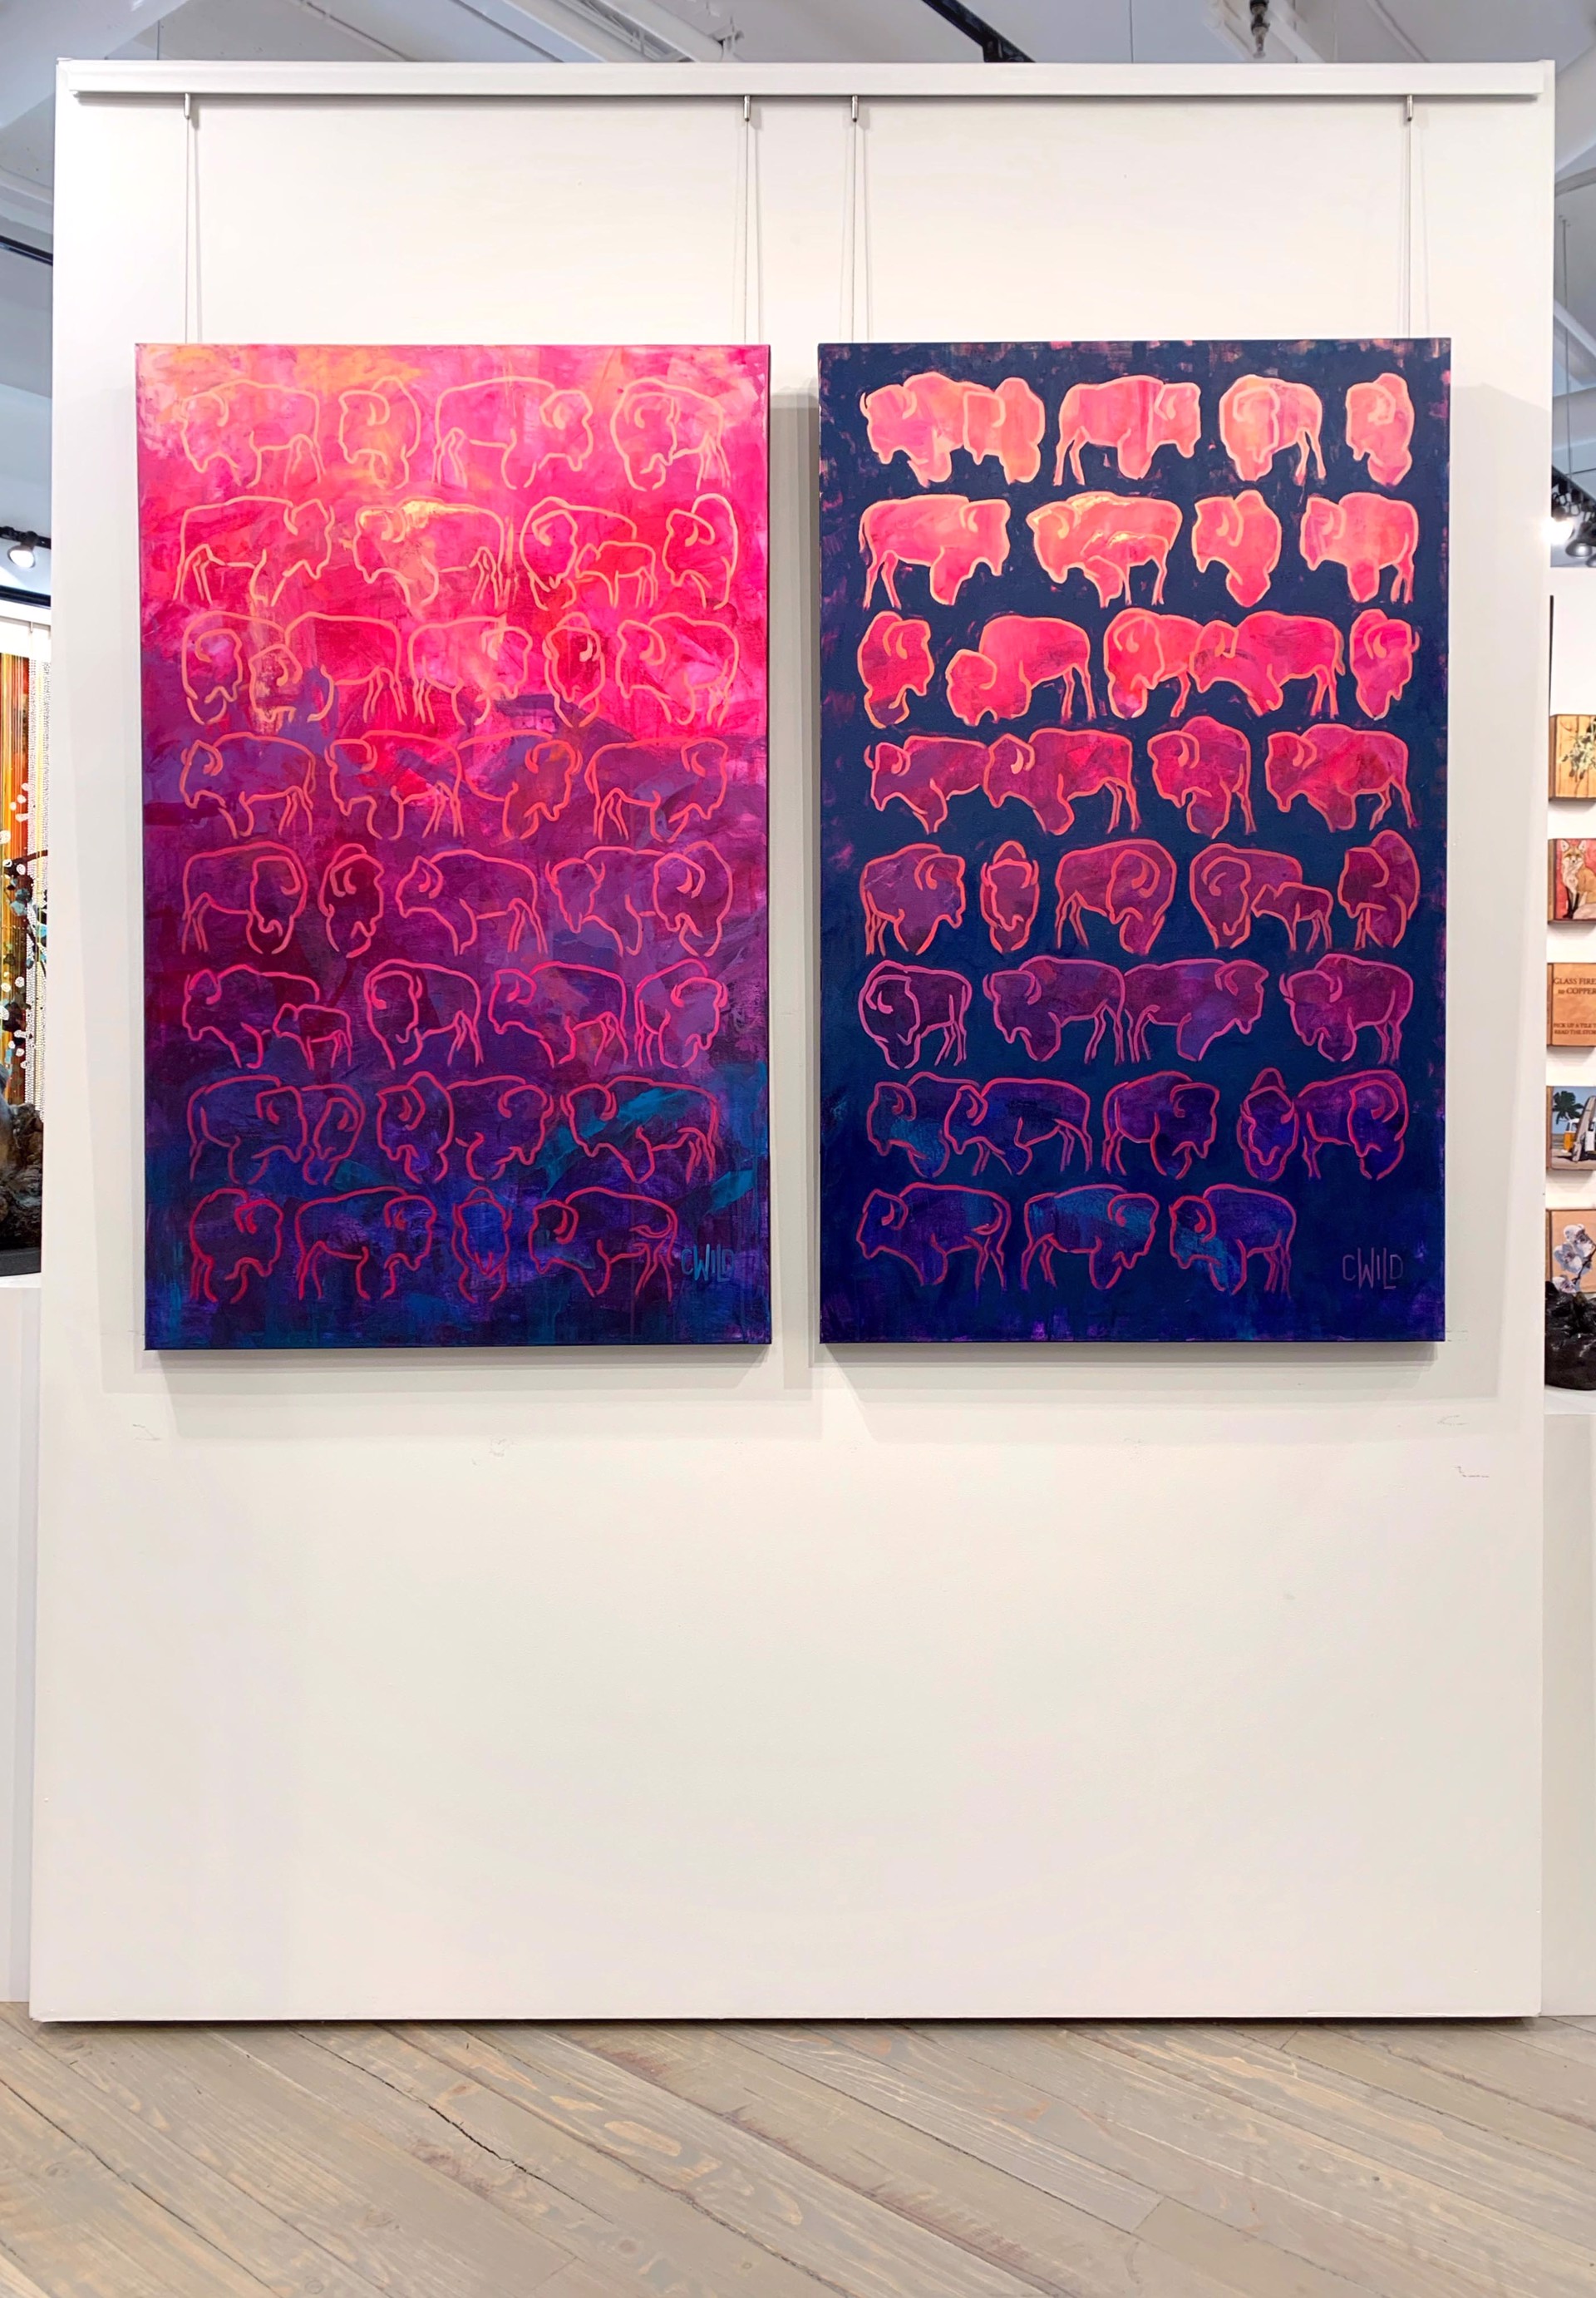 A Part Of Carrie Wild's Rendezvous Series Of A Herd Of Colorful Bison On An Ombre Background